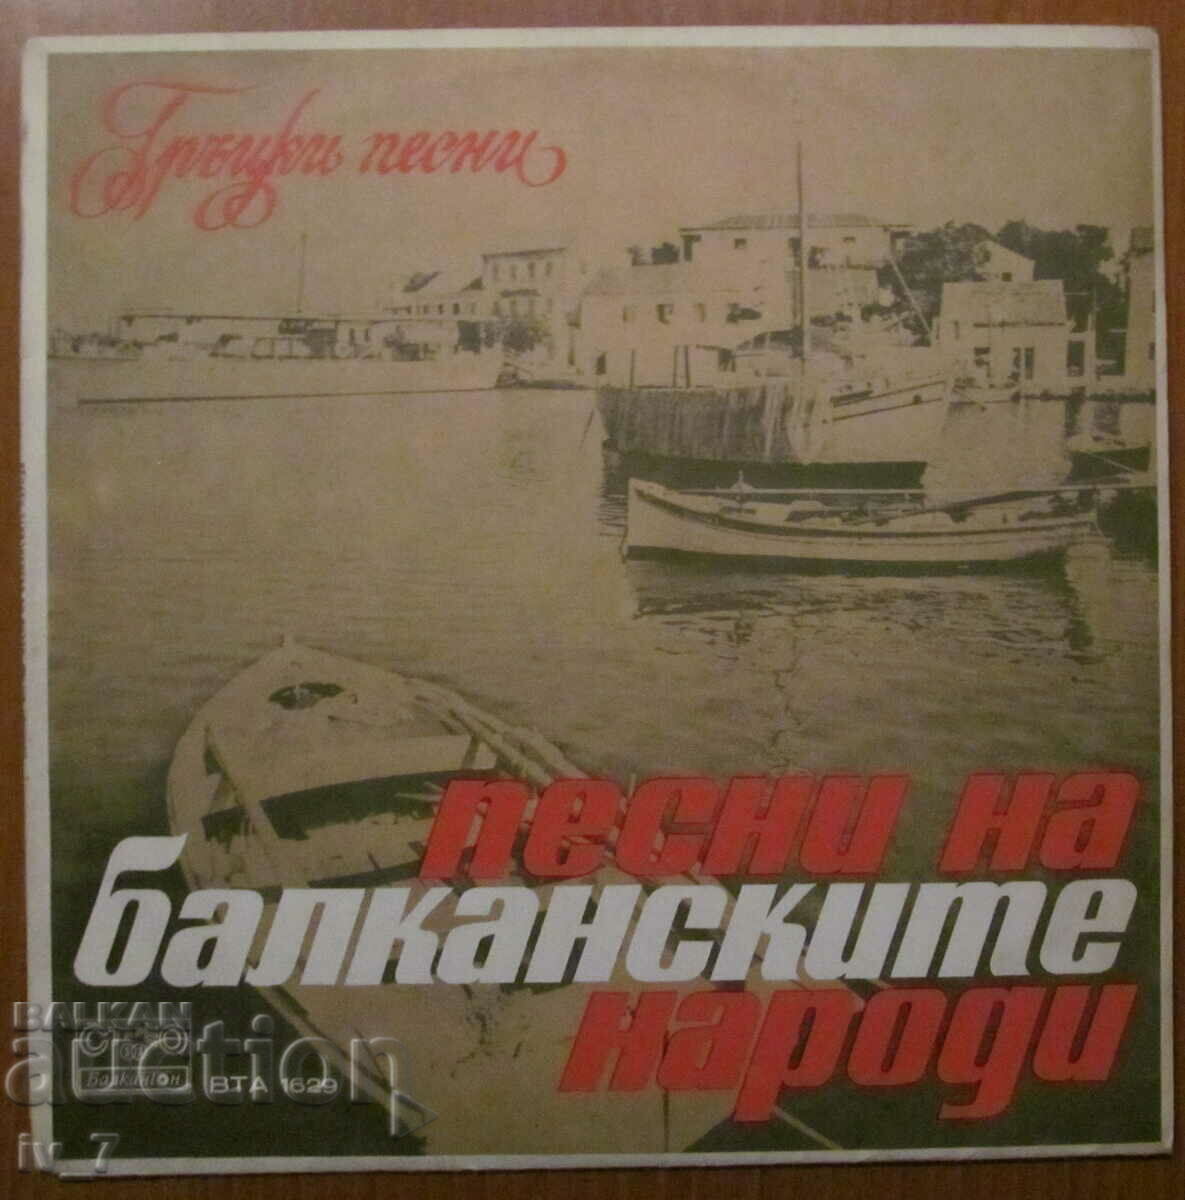 RECORD - SONGS OF THE BALKAN PEOPLES, large format